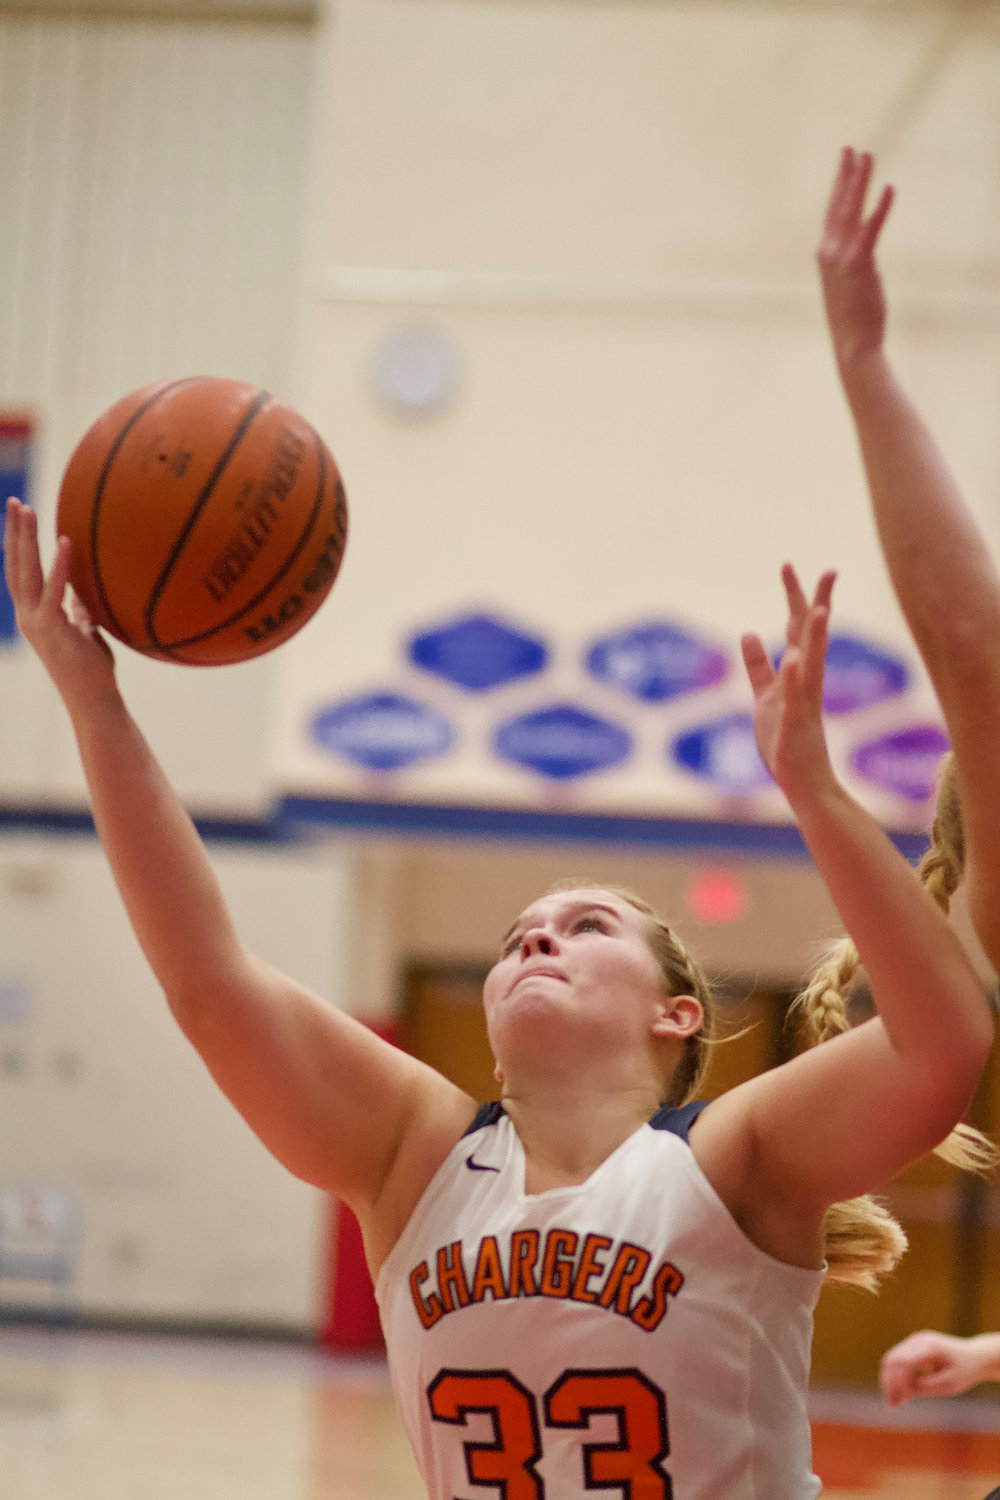 Lydia Dugard led the Chargers with 11 points in their win over Southmont.